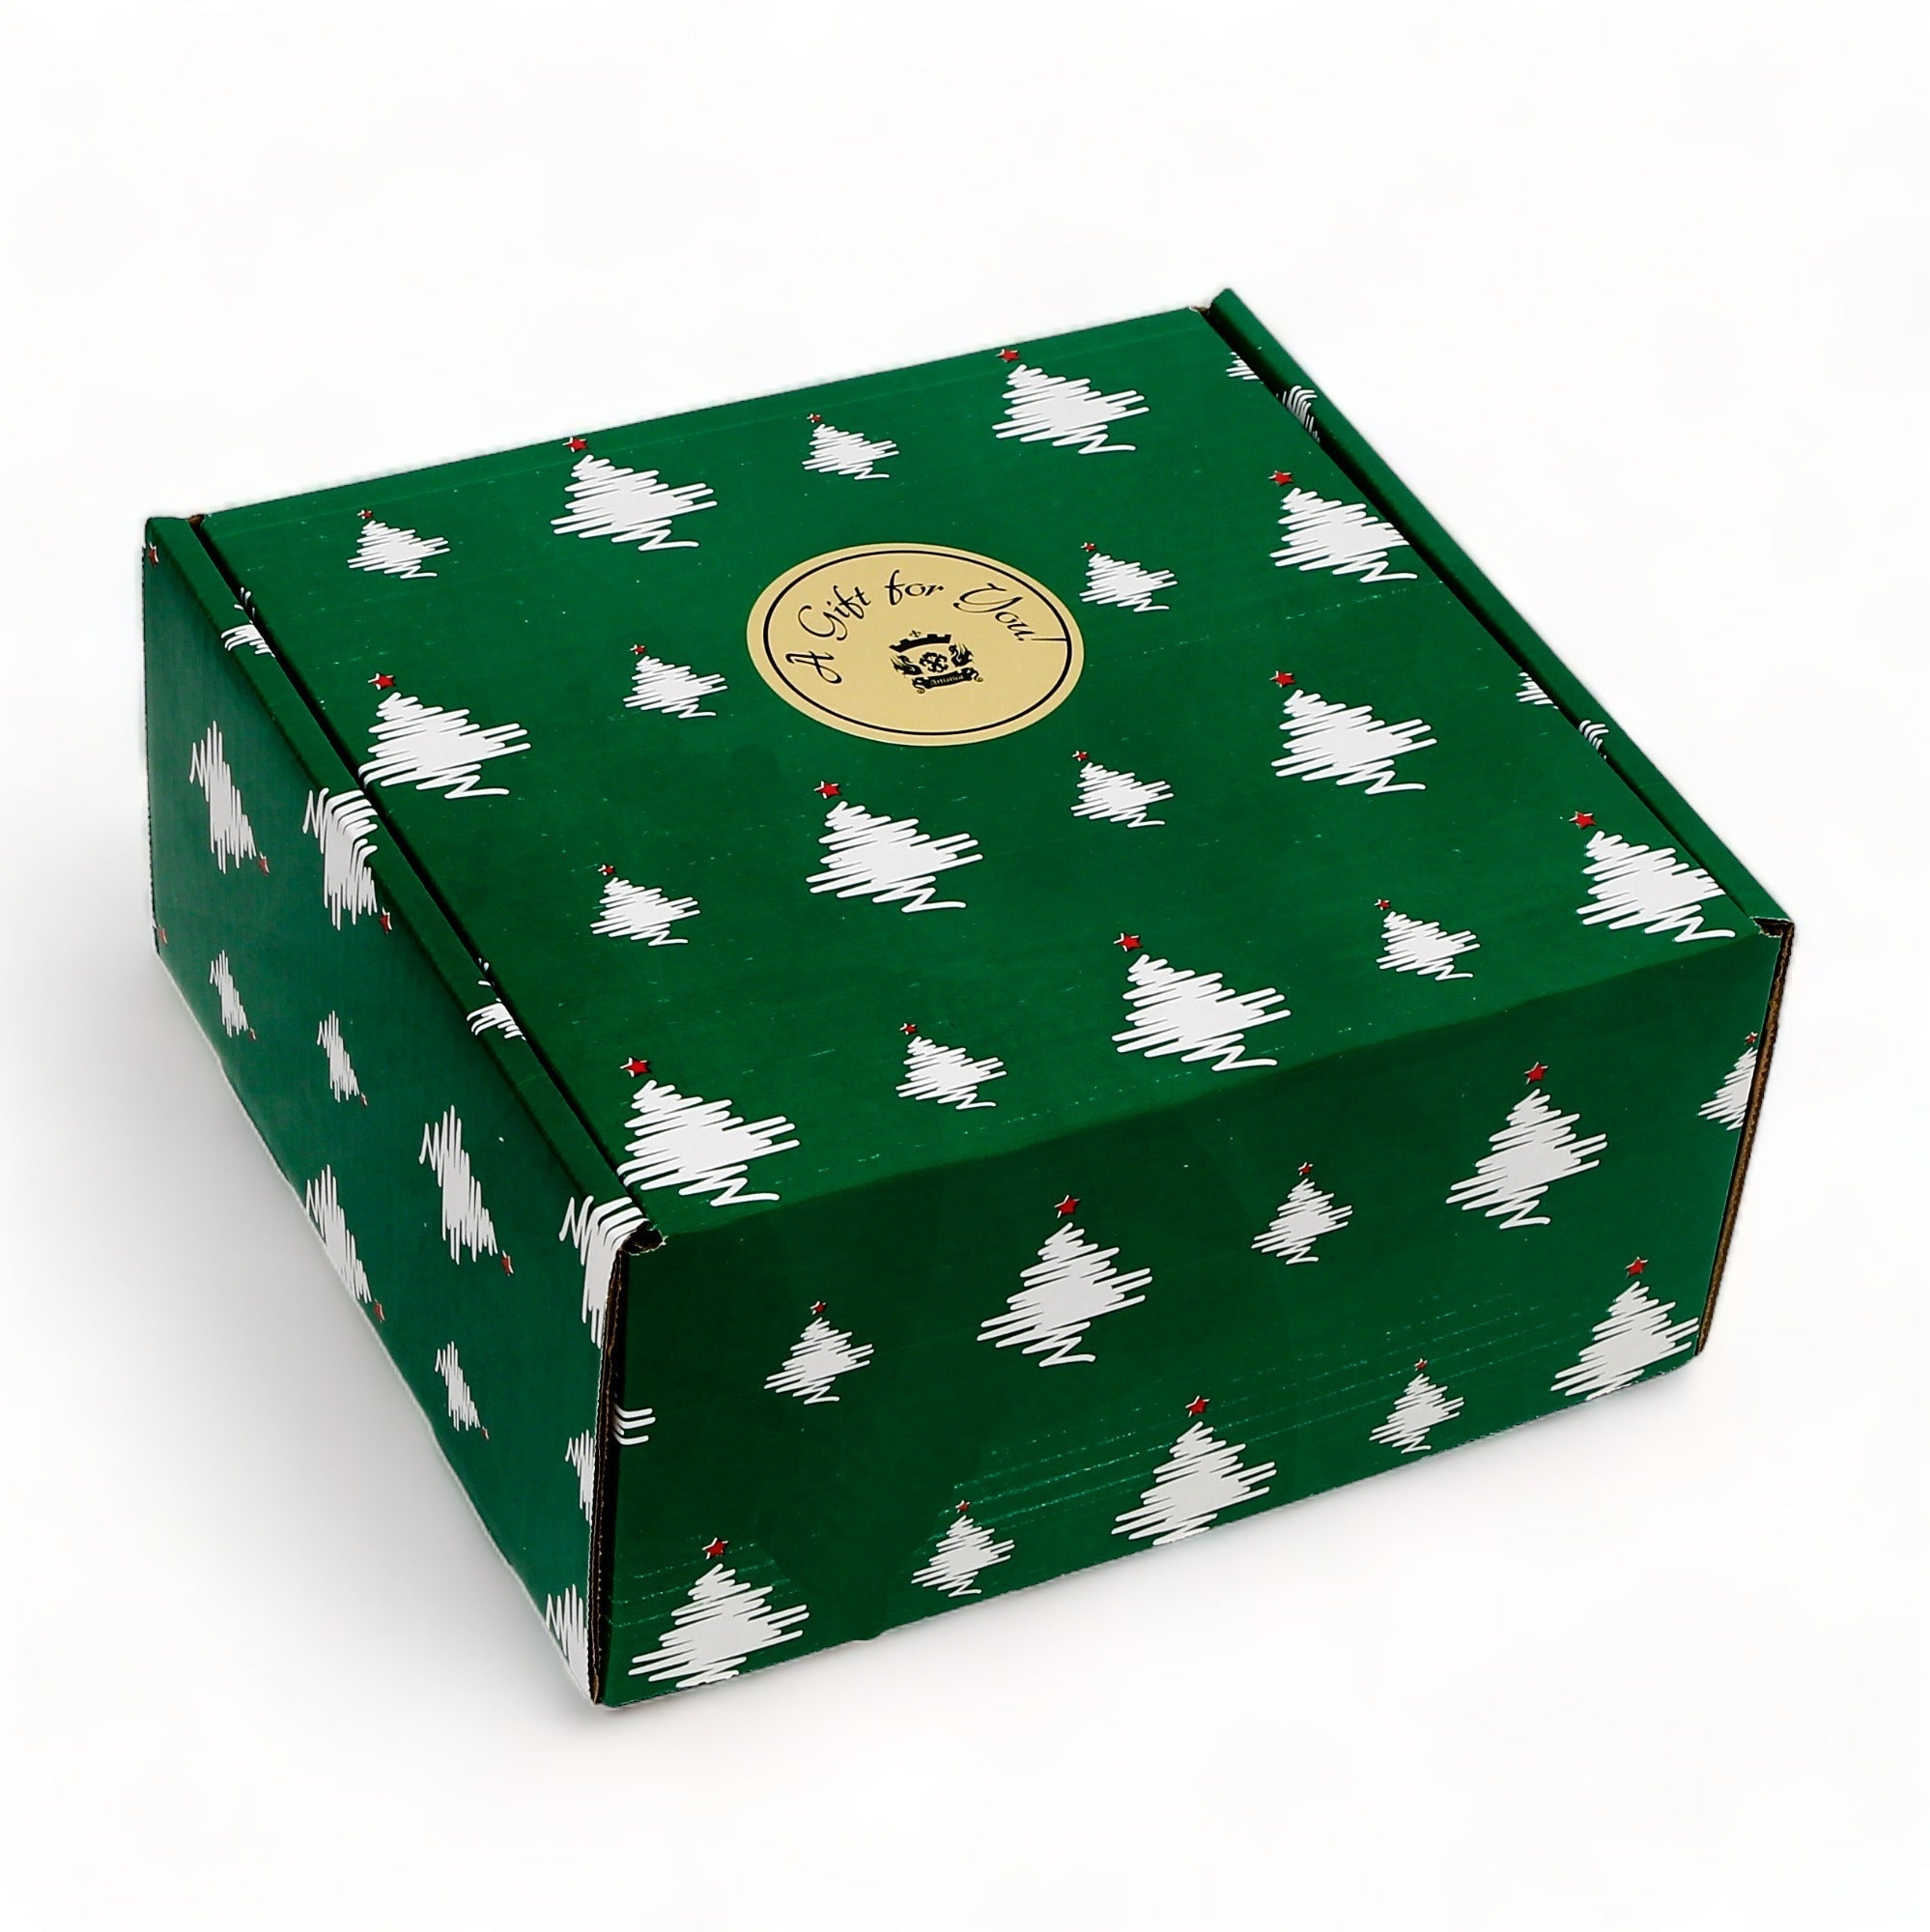 GIFT BOX CHRISTMAS: Green Gift Box with Deruta Orvieto Green Rooster of Fortune Pitcher